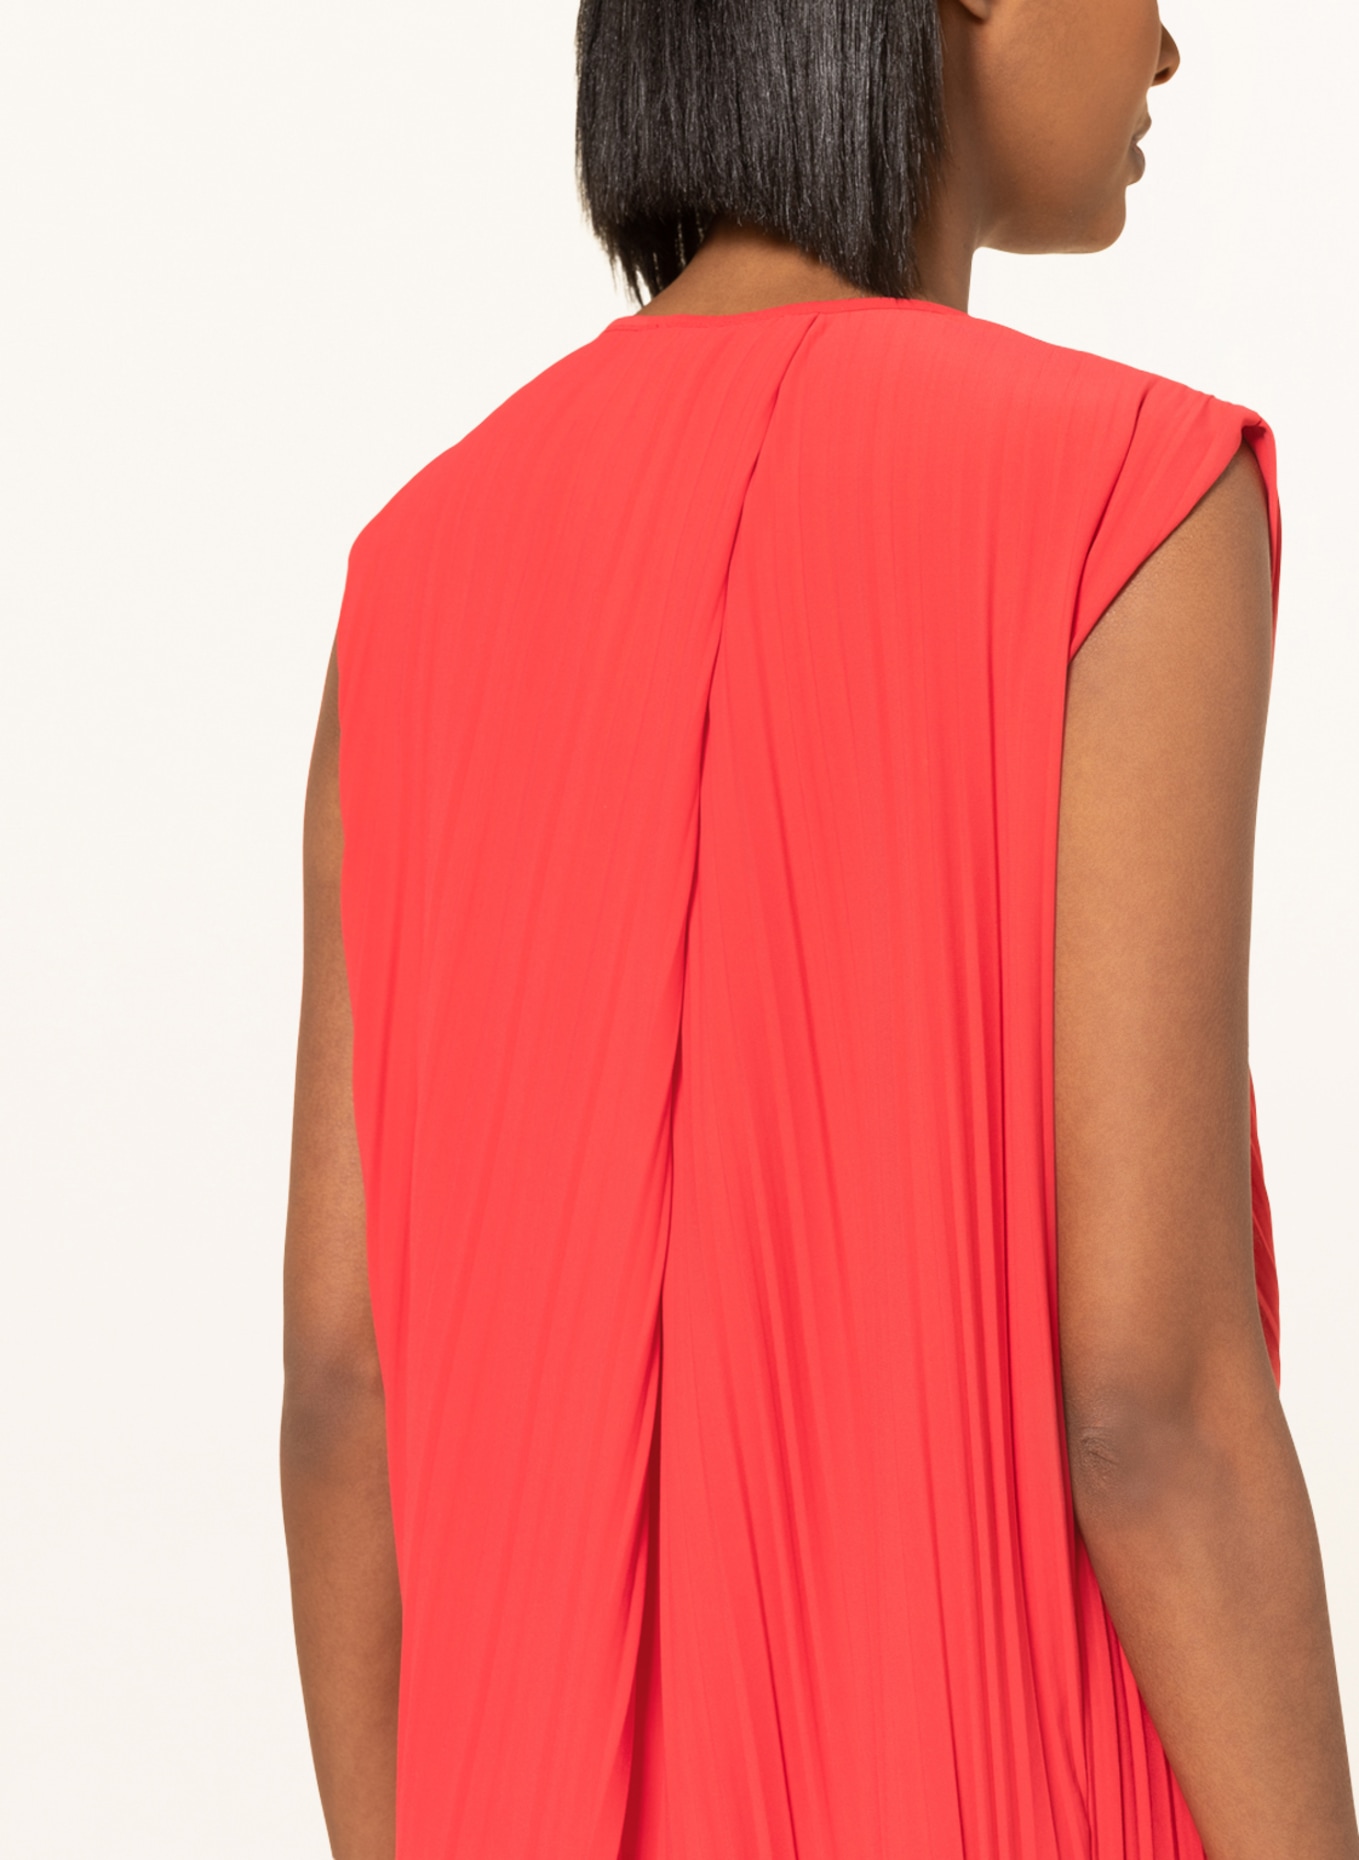 s.Oliver BLACK LABEL Blouse top made of pleated fabric, Color: RED (Image 4)